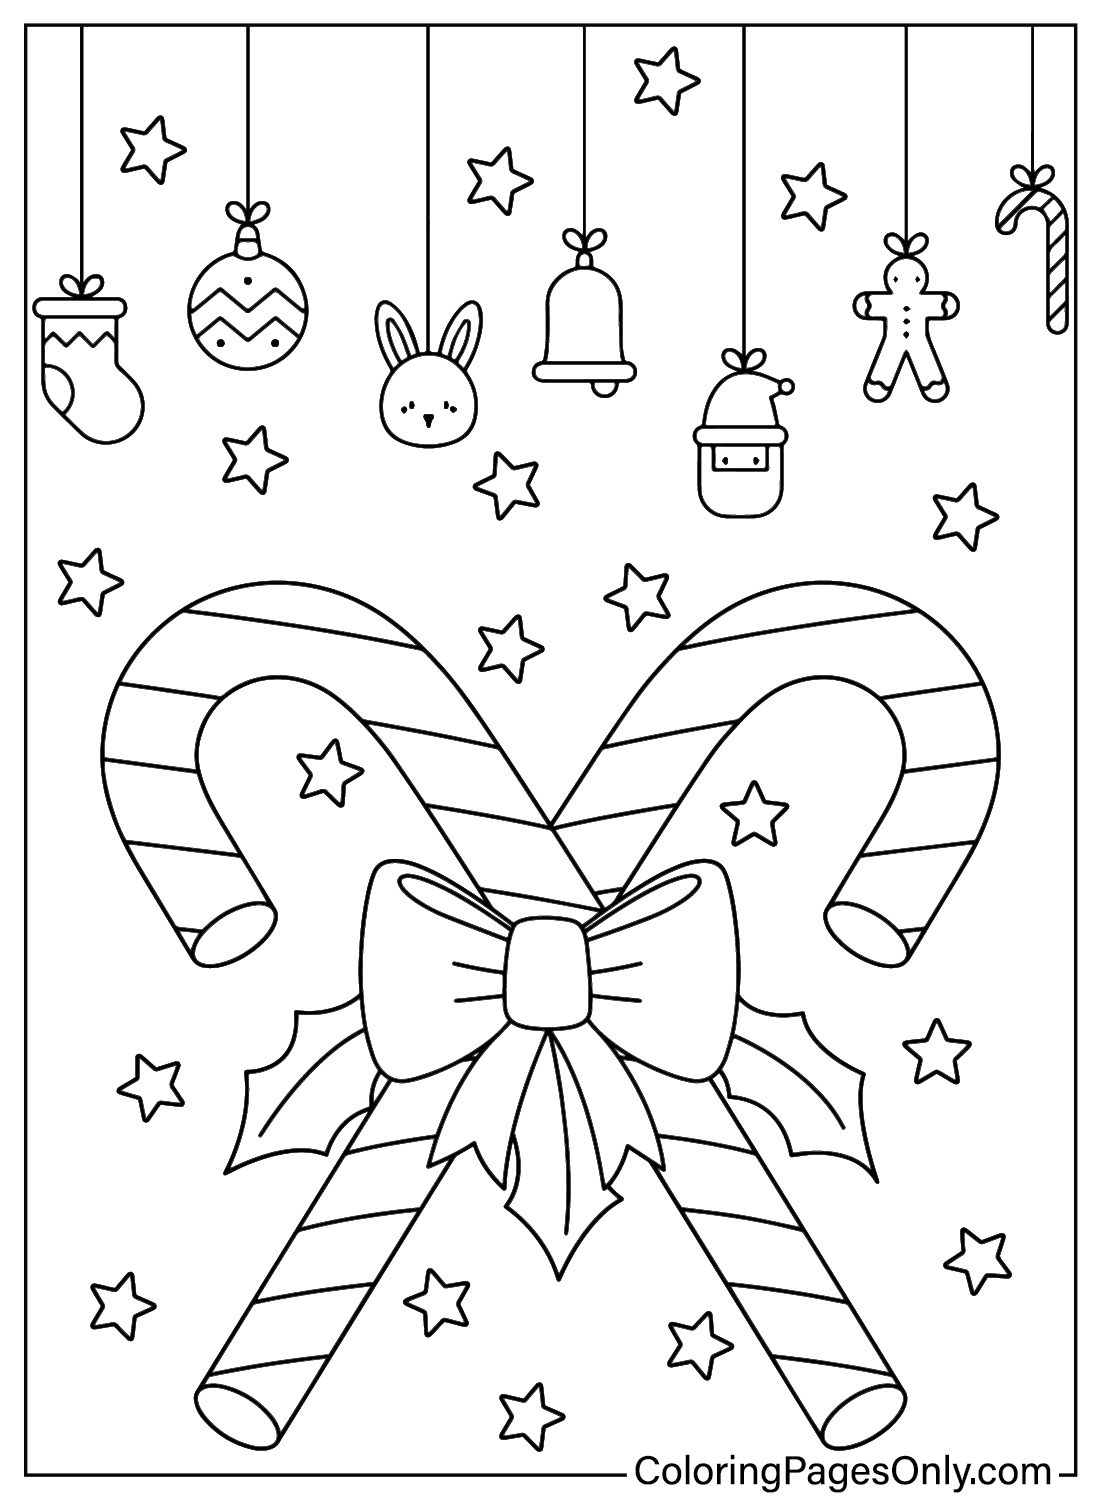 Coloring Page Christmas Candy Cane